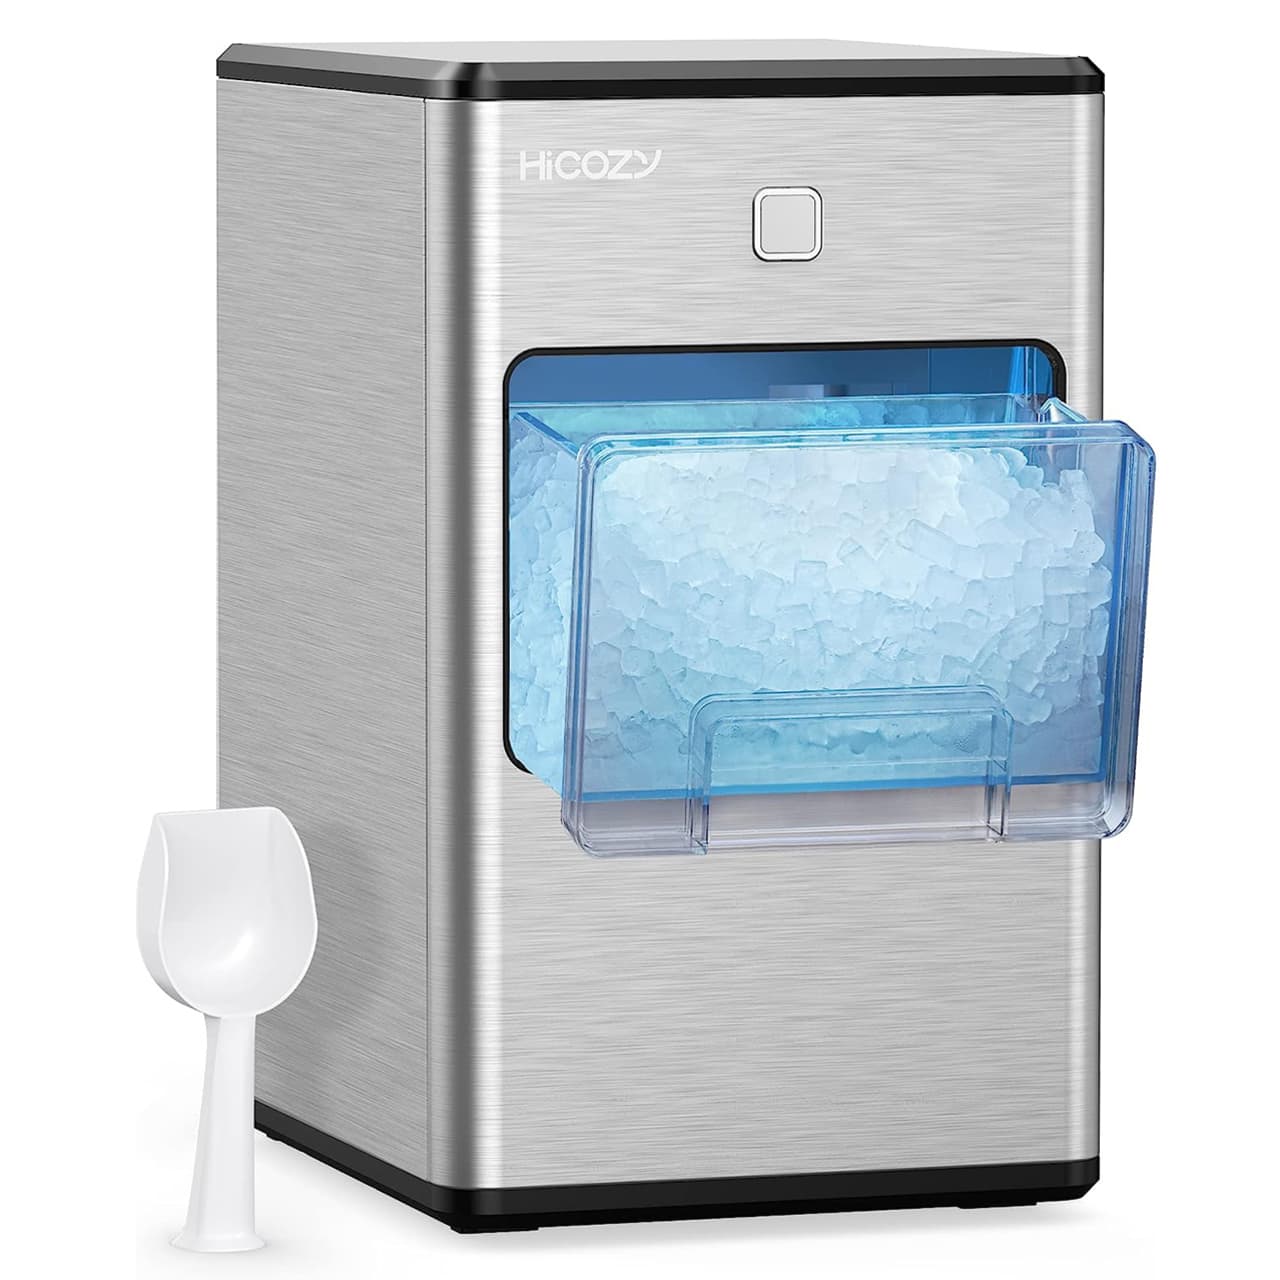 The best ice makers